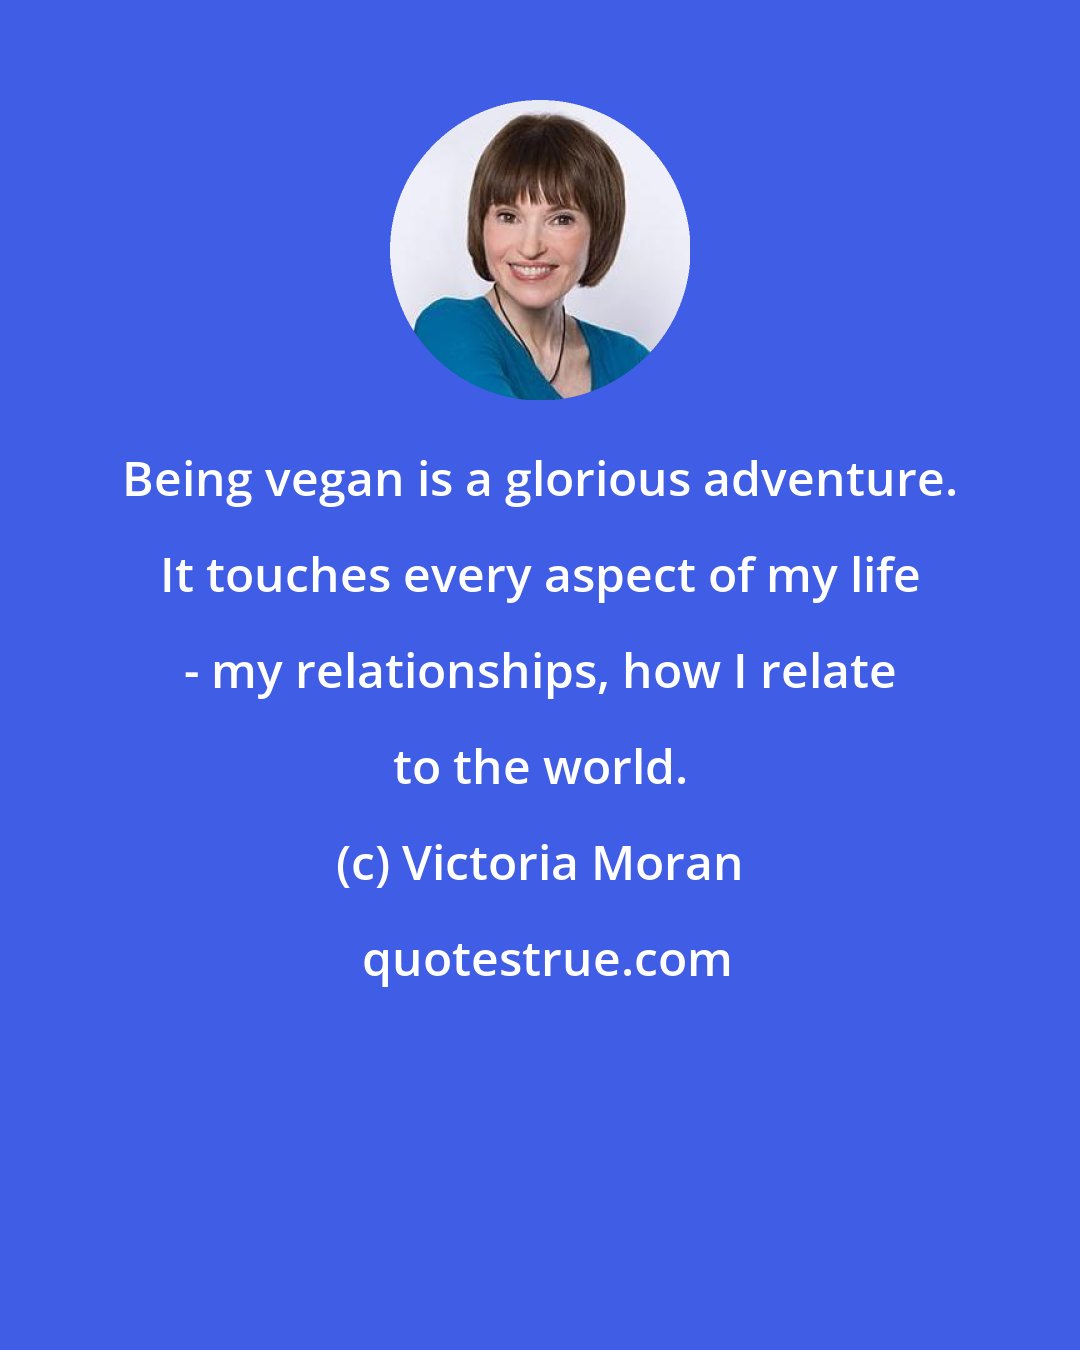 Victoria Moran: Being vegan is a glorious adventure. It touches every aspect of my life - my relationships, how I relate to the world.